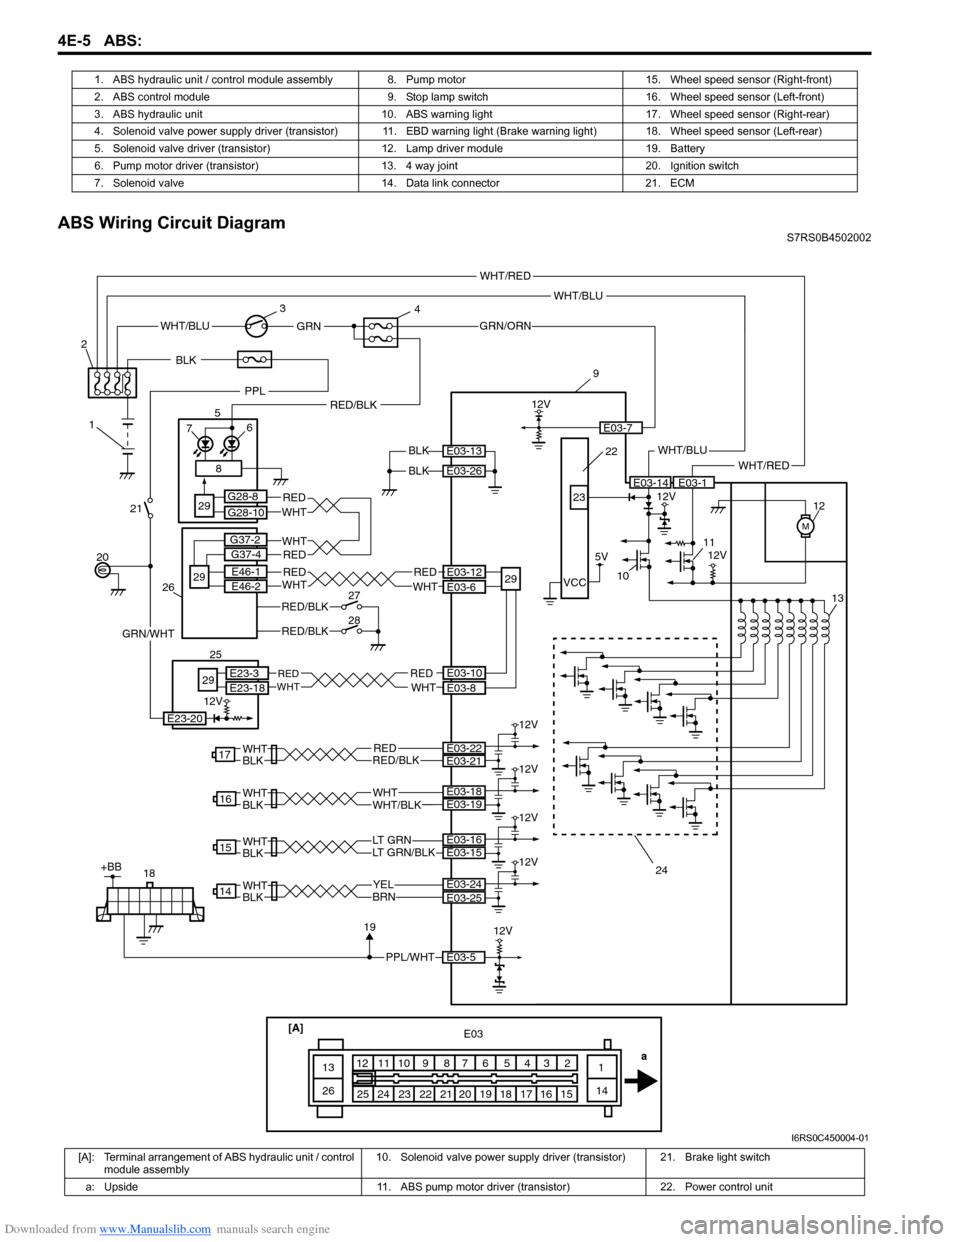 SUZUKI SWIFT 2008 2.G Service Workshop Manual Downloaded from www.Manualslib.com manuals search engine 4E-5 ABS: 
ABS Wiring Circuit DiagramS7RS0B4502002
1. ABS hydraulic unit / control module assembly 8.
Pump motor 15. Wheel speed sensor (Right-